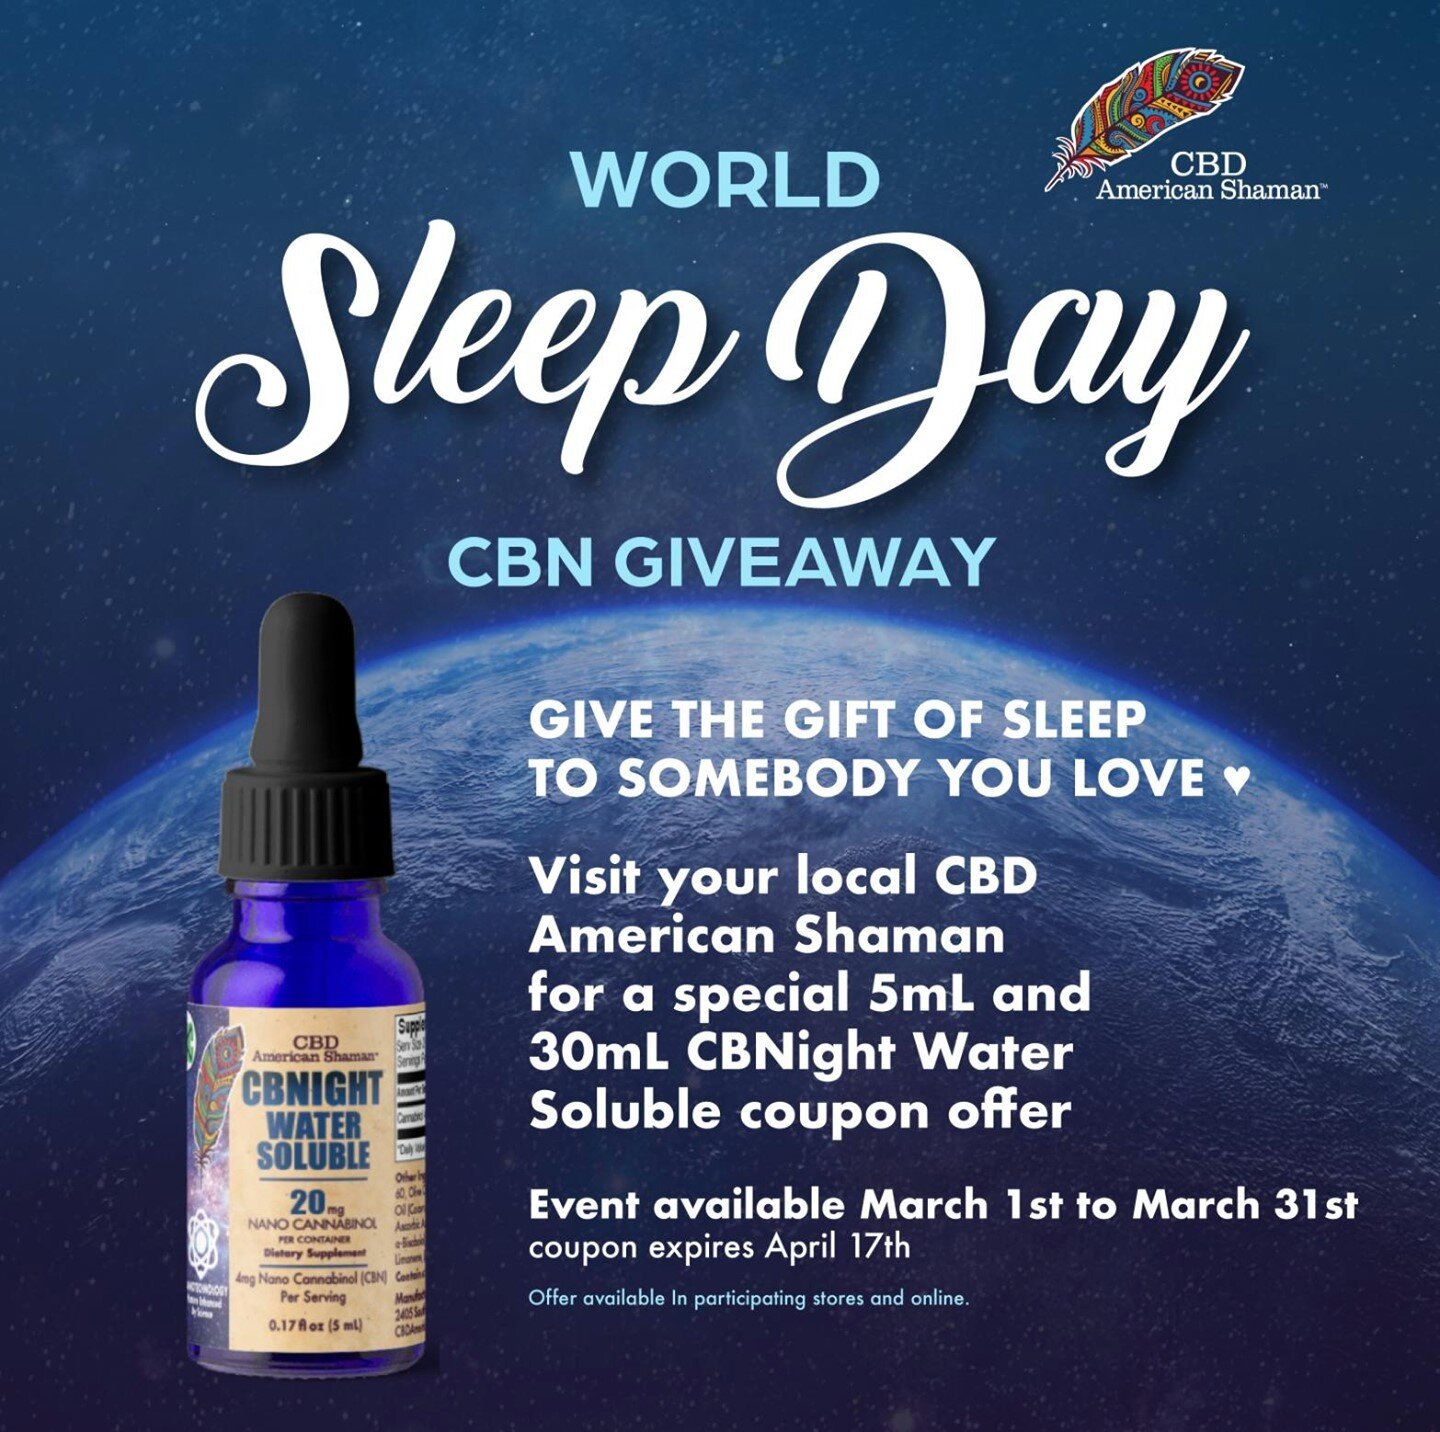 All of March we are having a GIVEAWAY! Receive a coupon for a FREE 5ml CBNight sample bottle + 20% off a 30ml bottle. ⠀
Order Online Here▶️▶️ https://buff.ly/3kObp3b⠀
________________________________⠀
#cbd #sleepday #cbn #health #anxiety #pain #stres